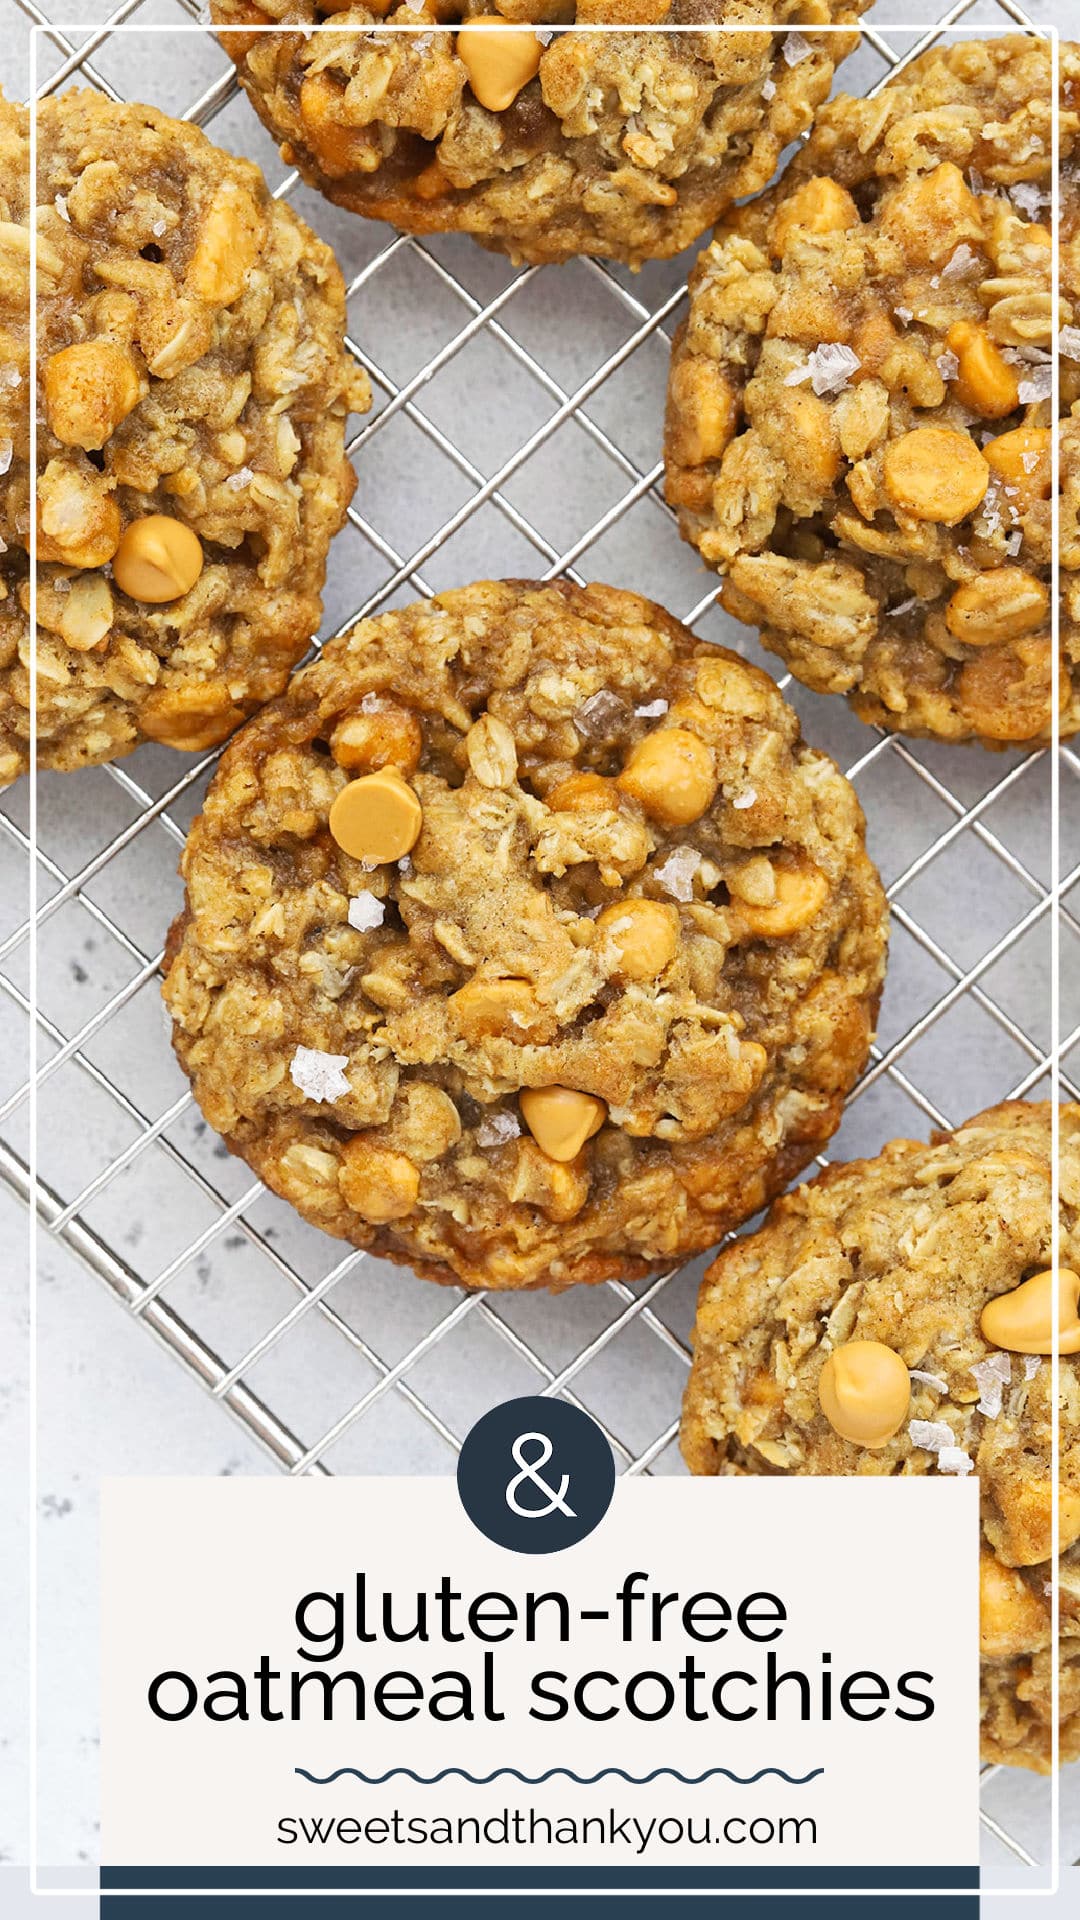 Gluten-Free Oatmeal Butterscotch Cookies - Easy, chewy gluten-free oatmeal scotchies cookies are loaded with flavor & have the best texture! // the best oatmeal scotchies recipe // gluten-free oatmeal cookies recipe // chewy oatmeal cookies // gluten free cookies // butterscotch cookies // gluten free butterscotch cookies // 